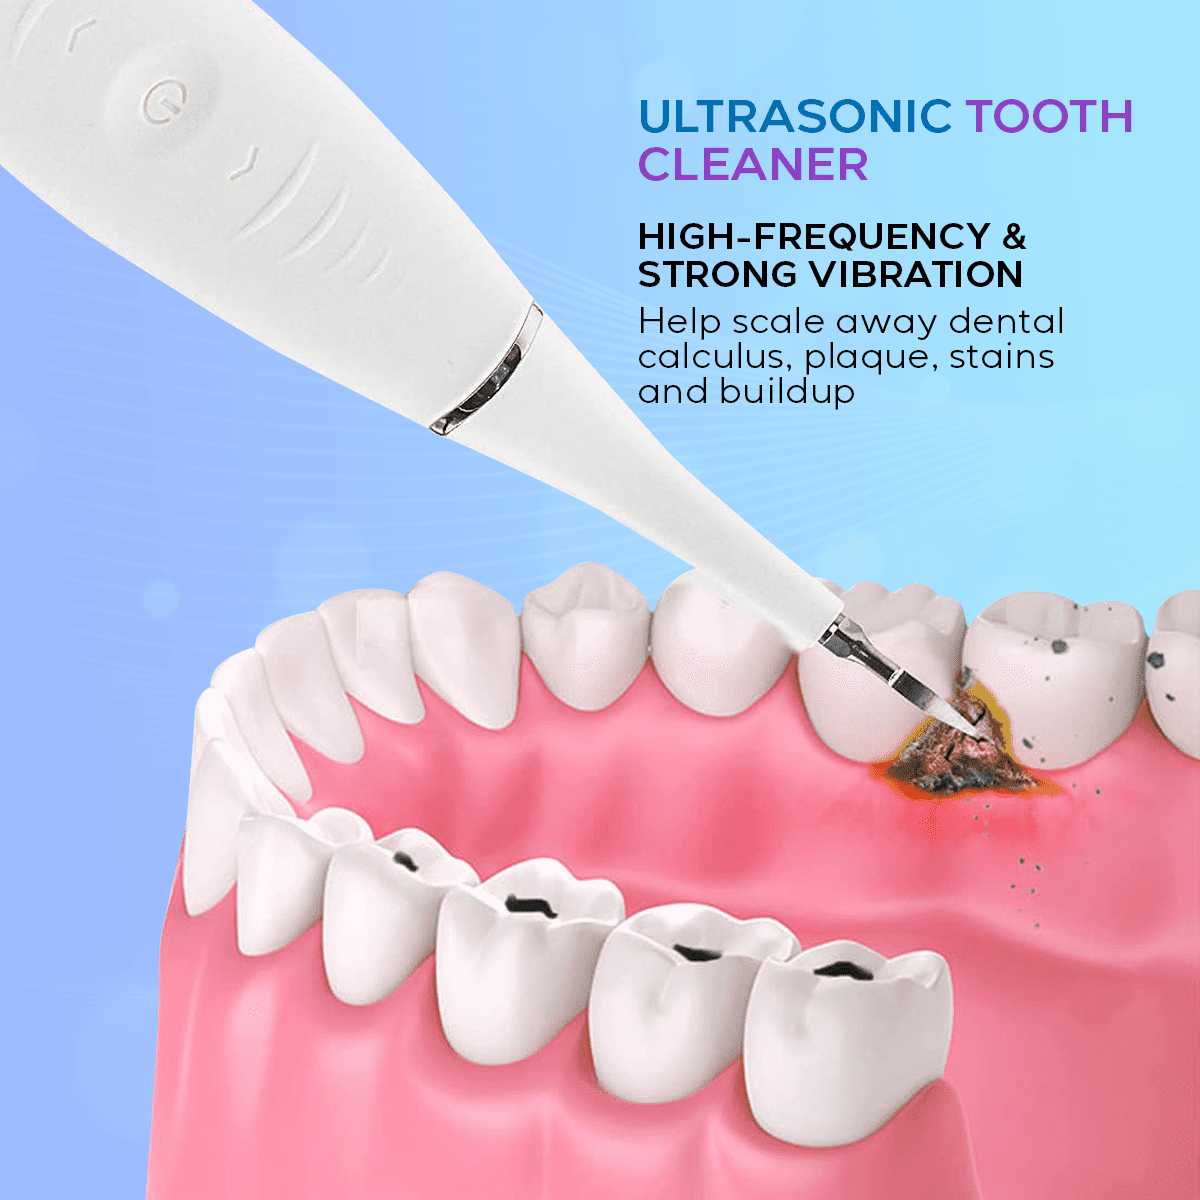 Ultrasonic Tooth Cleaner: High-Frequency Plaque Removal, Safe for Enamel, Rechargeable, Dental Care for Home Use DP7